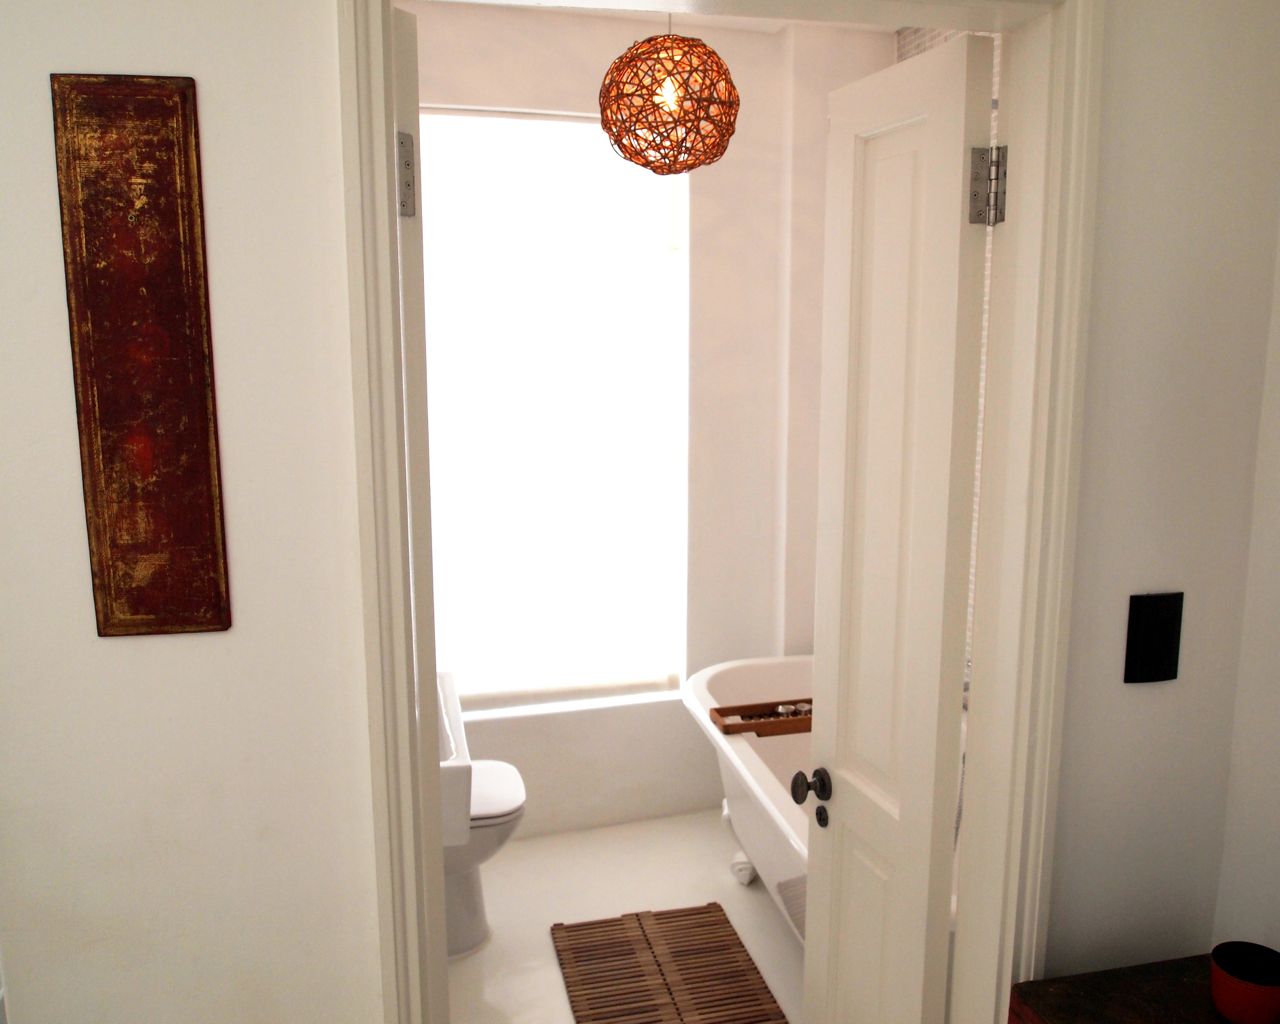 Photo 10 of Loader Street Apartment accommodation in De Waterkant, Cape Town with 3 bedrooms and 2 bathrooms